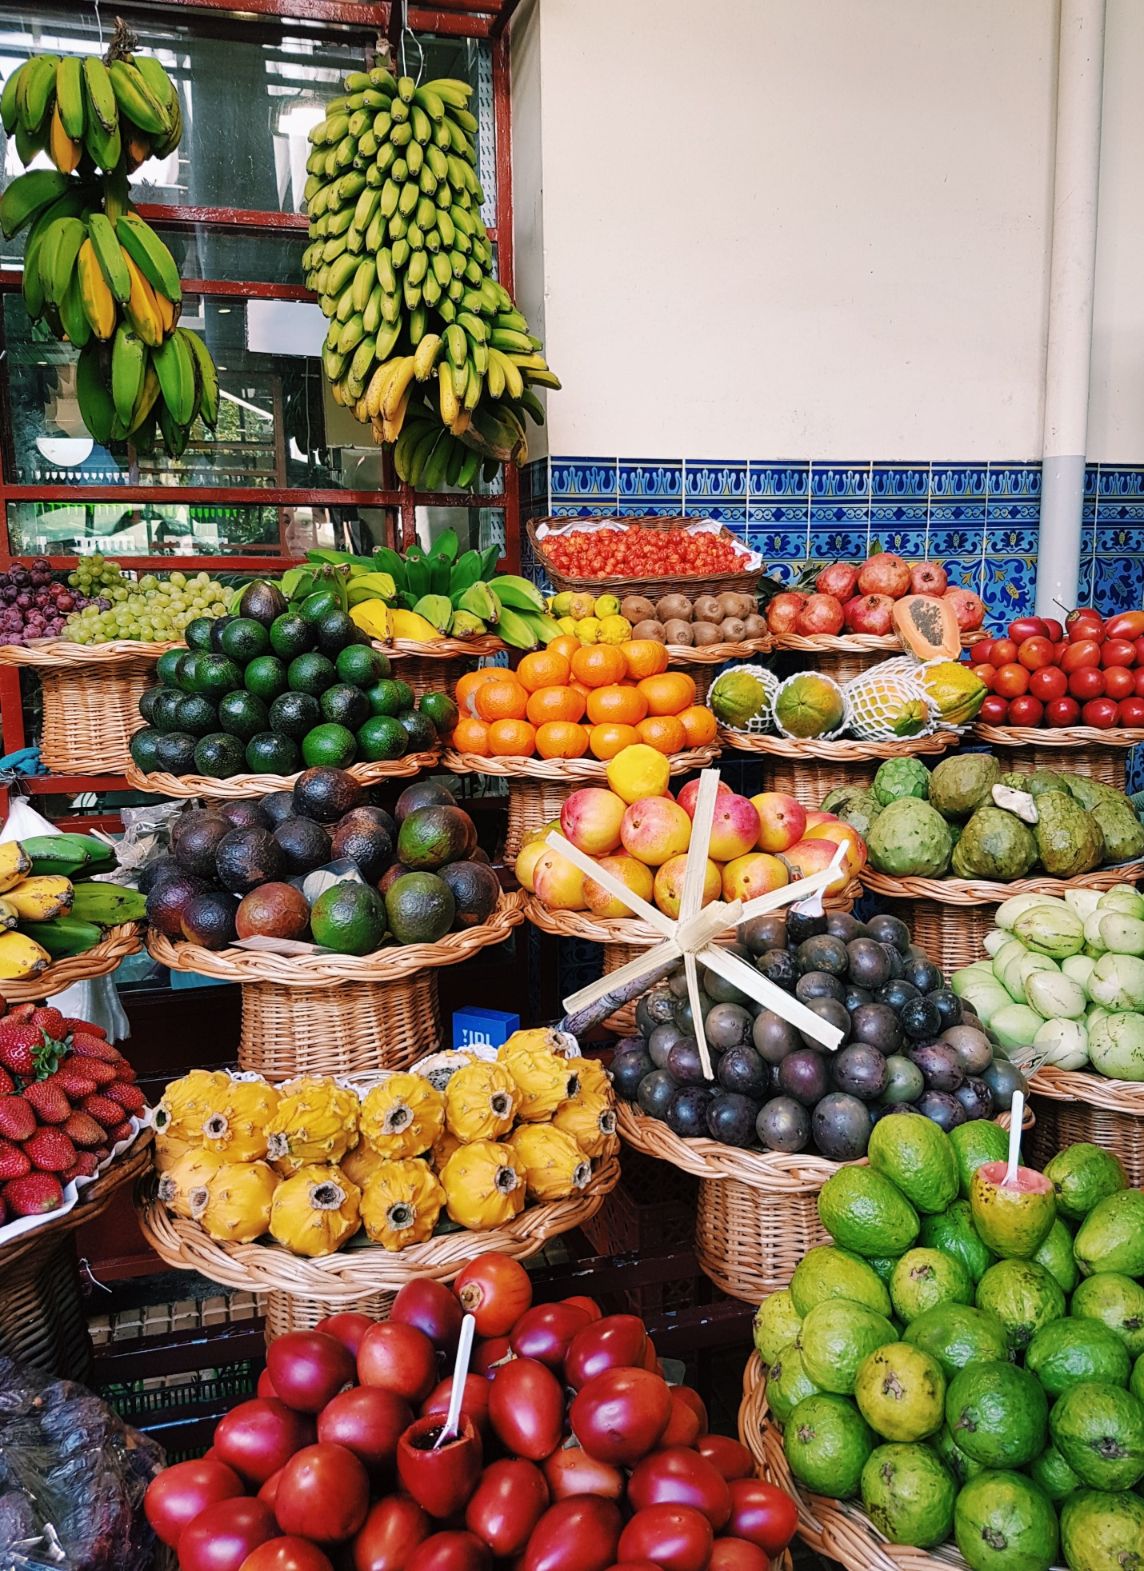 A market full of veggies and fruits in Madeira, Portugal.